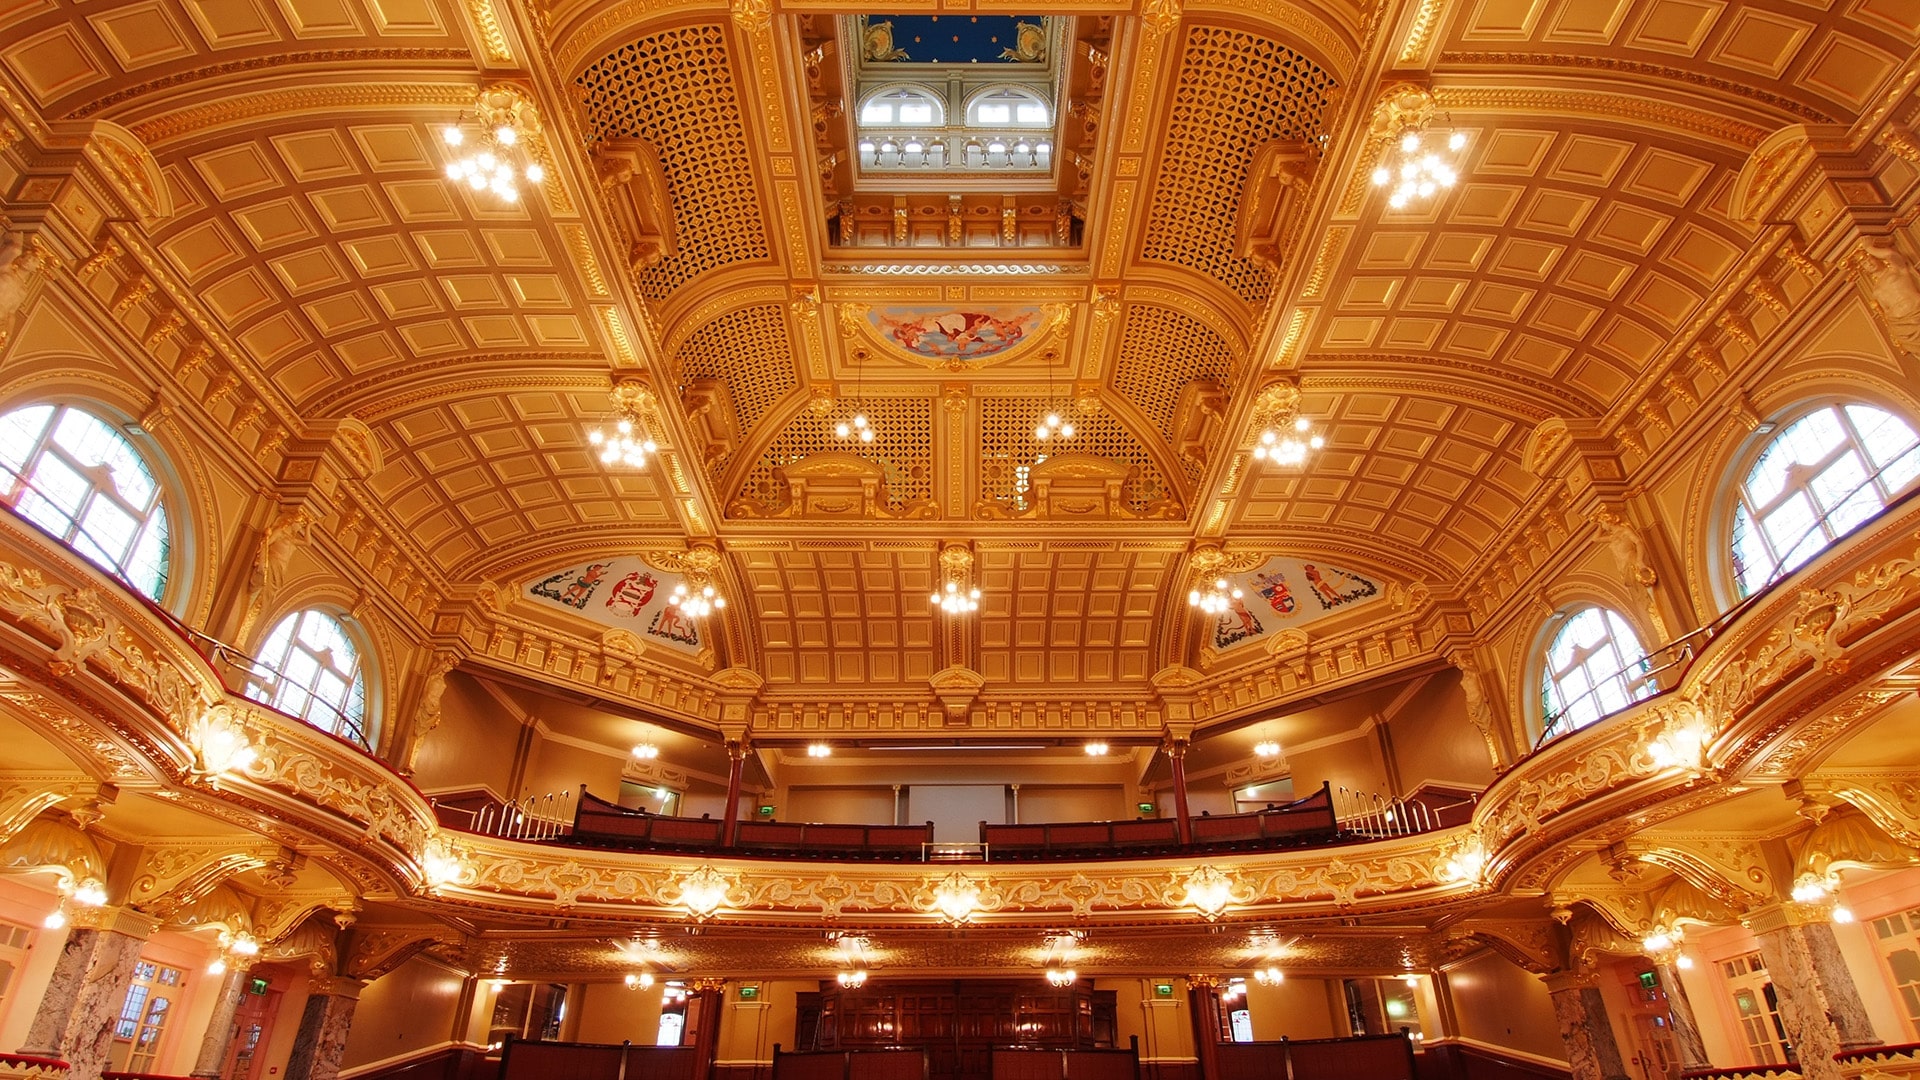 View from the stage of the Royal Hall including seating and ceiling